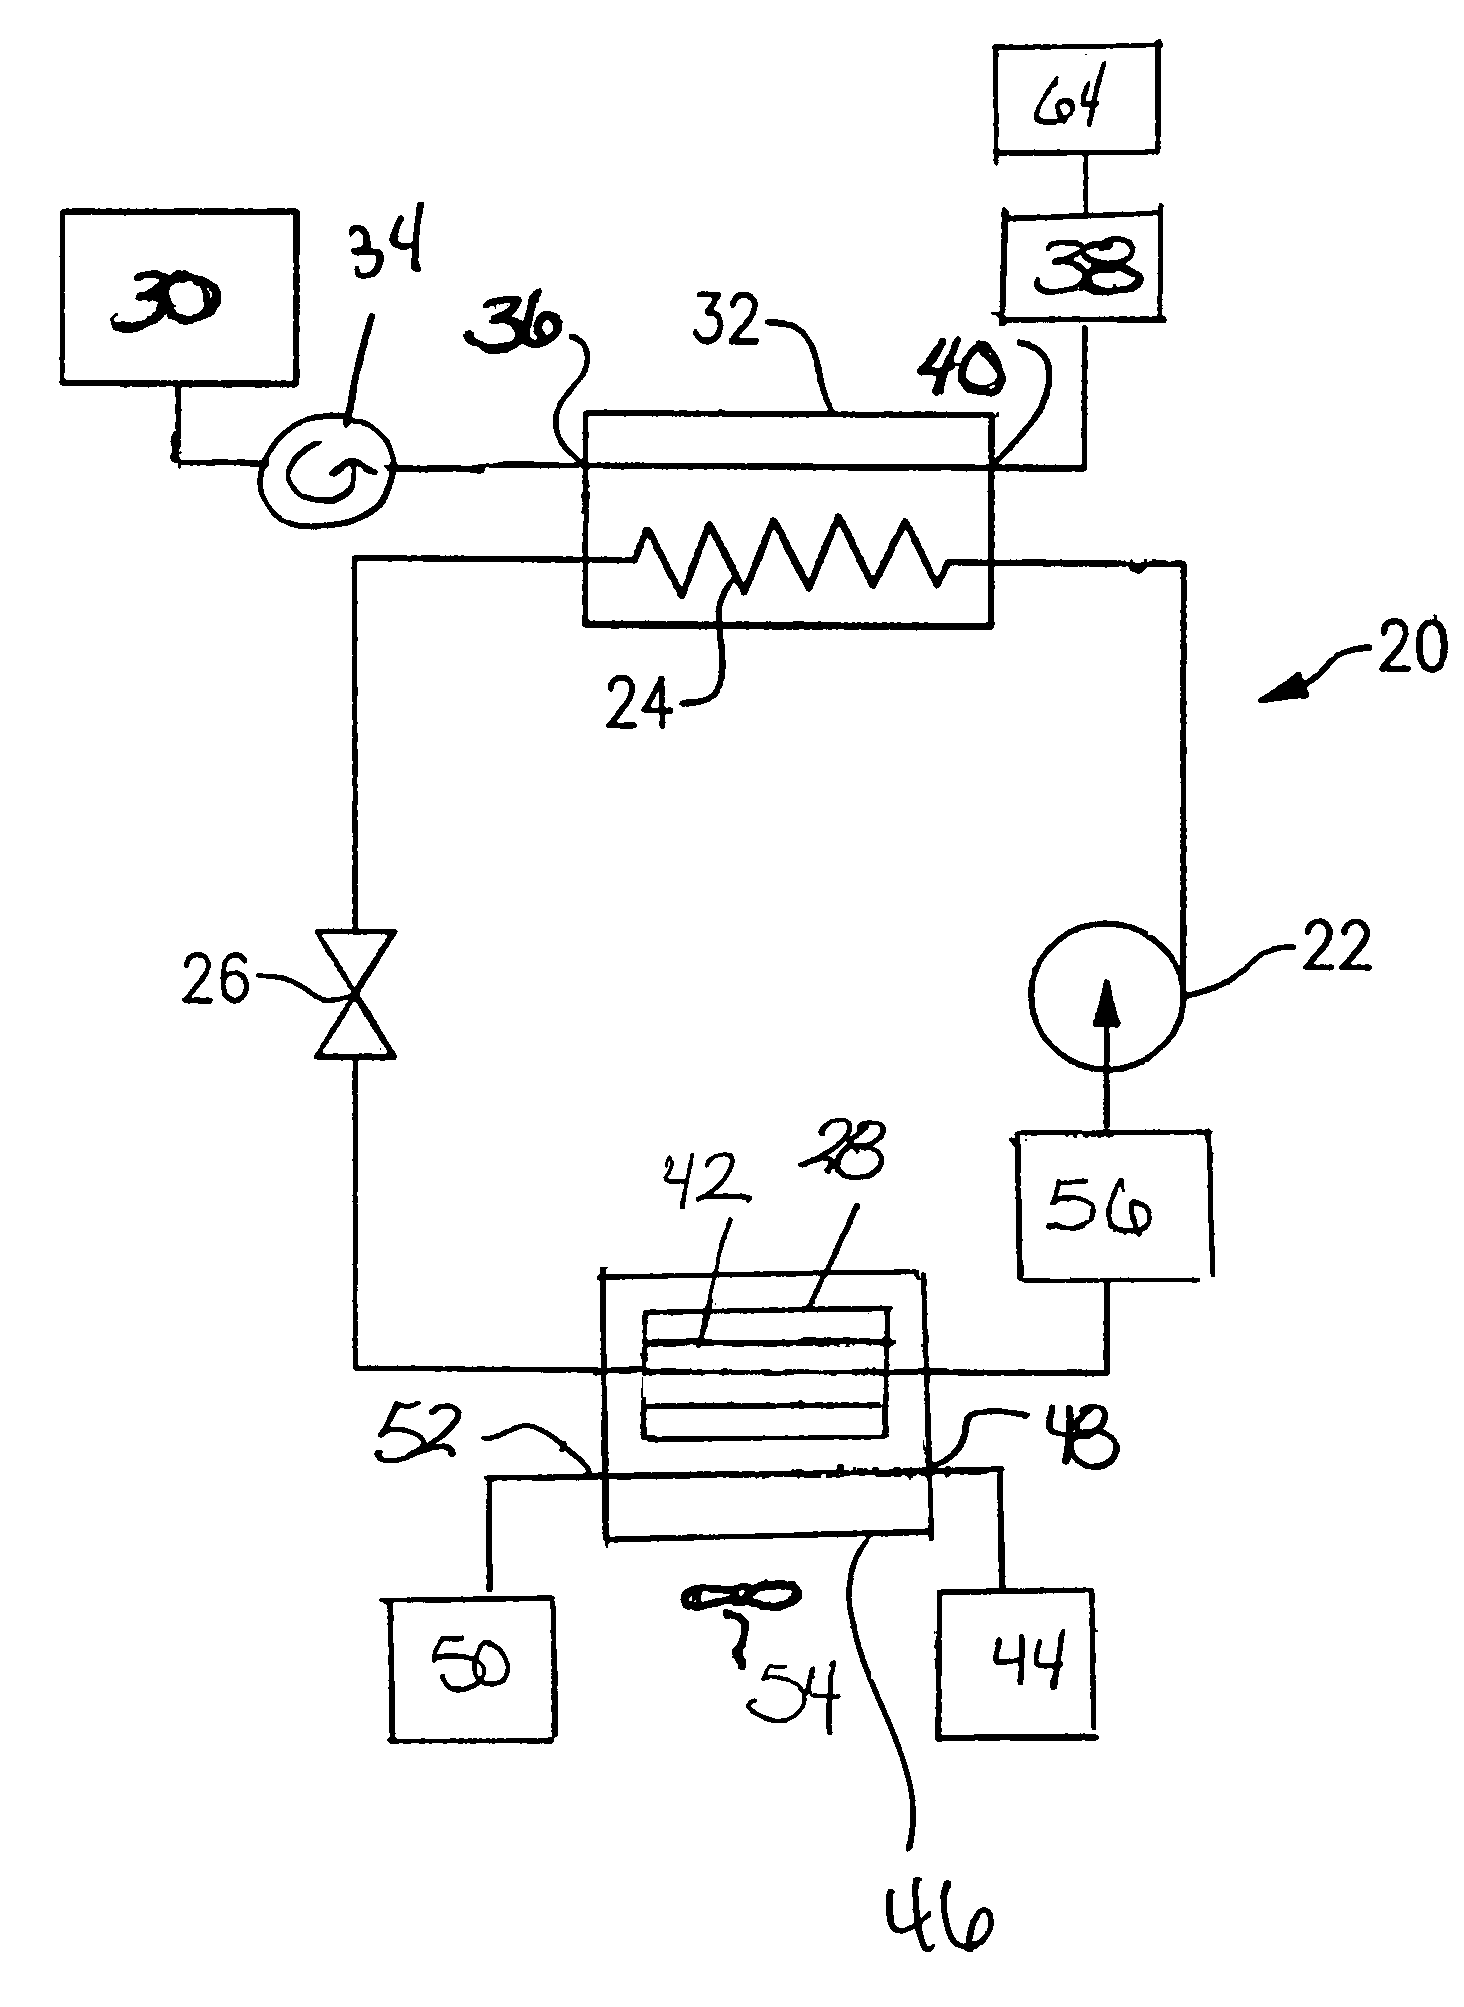 Vapor compression systems using an accumulator to prevent over-pressurization